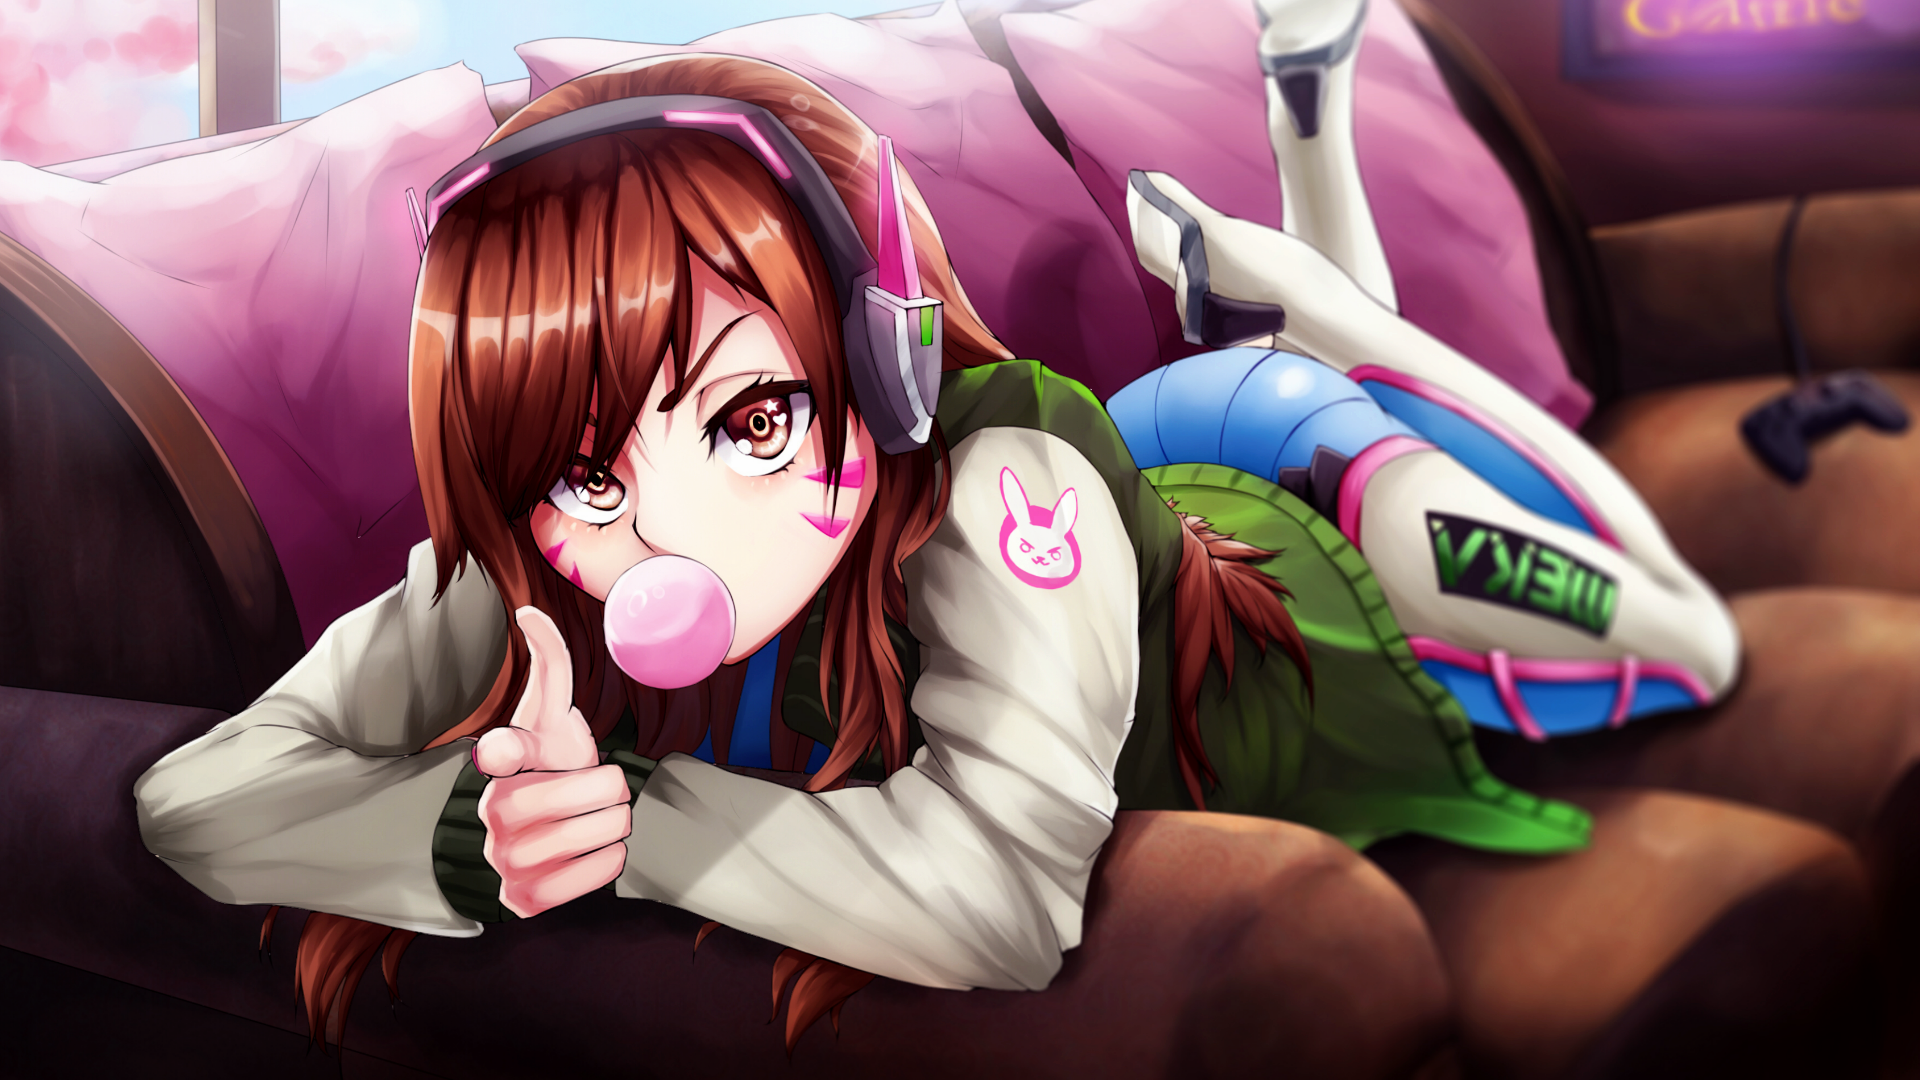 Anime 1920x1080 anime bubble gum anime girls couch PC gaming lying on front D.Va (Overwatch)